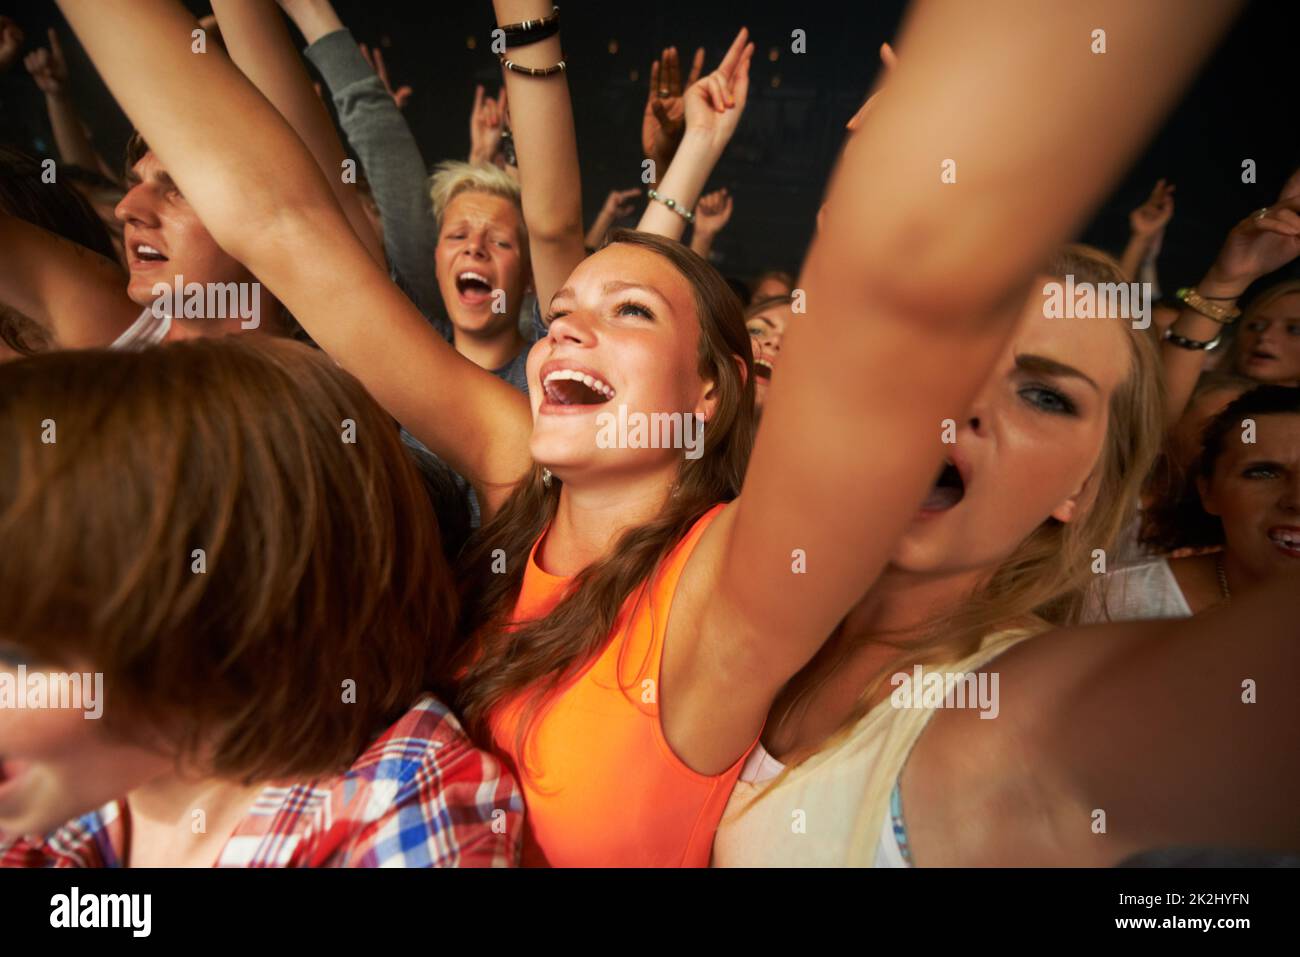 These girls love their music. Attractive female fans enjoying a concert. Stock Photo